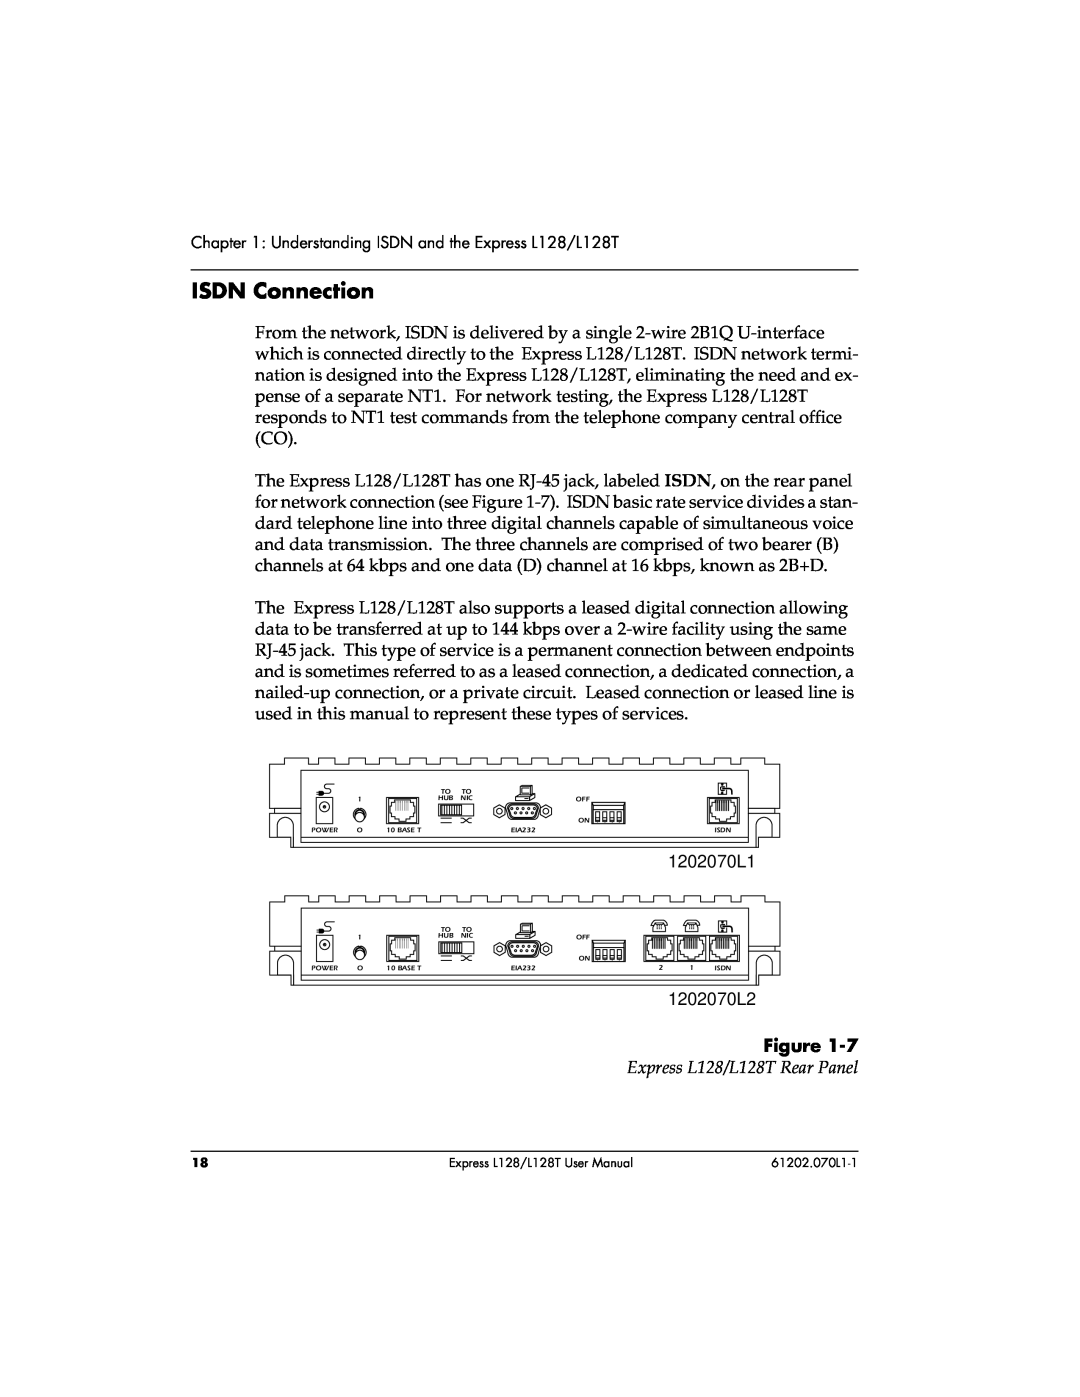 ADTRAN user manual ISDN Connection, Express L128/L128T Rear Panel 